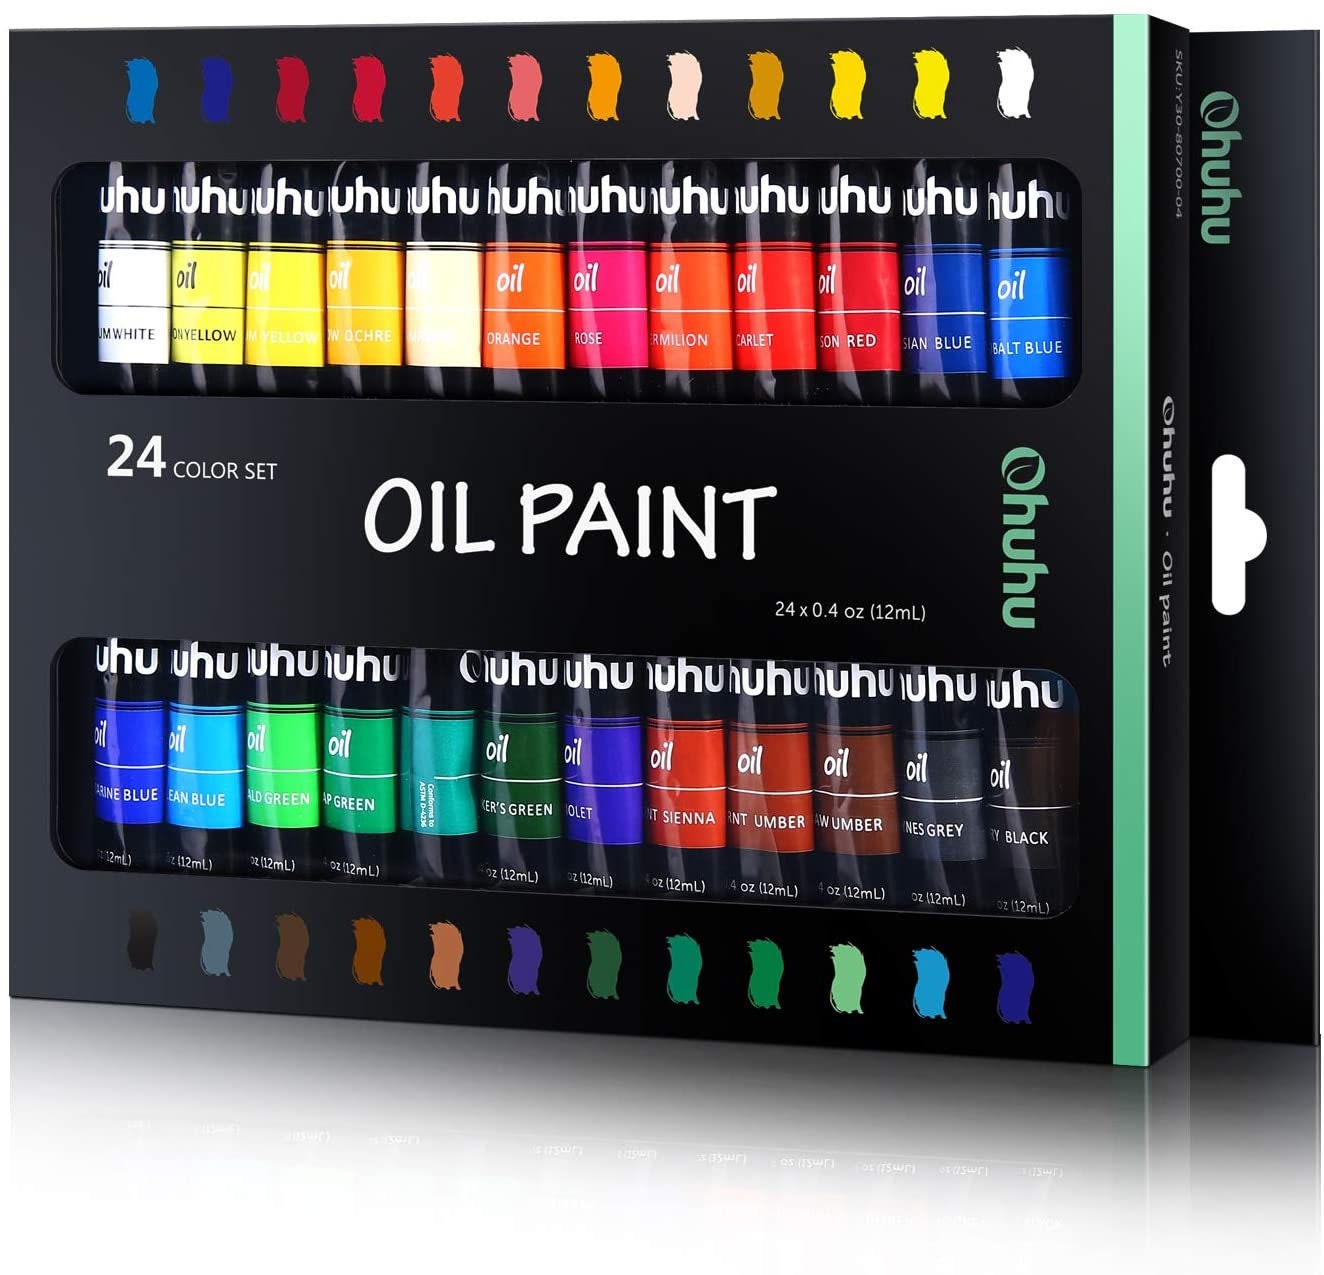 Arteza Acrylic Paint Set, 100 Colors, 041 fl oz 12ml Tubes of Craft Paint, Heavy-Body, Glossy Finish, Colorful Addition to Your